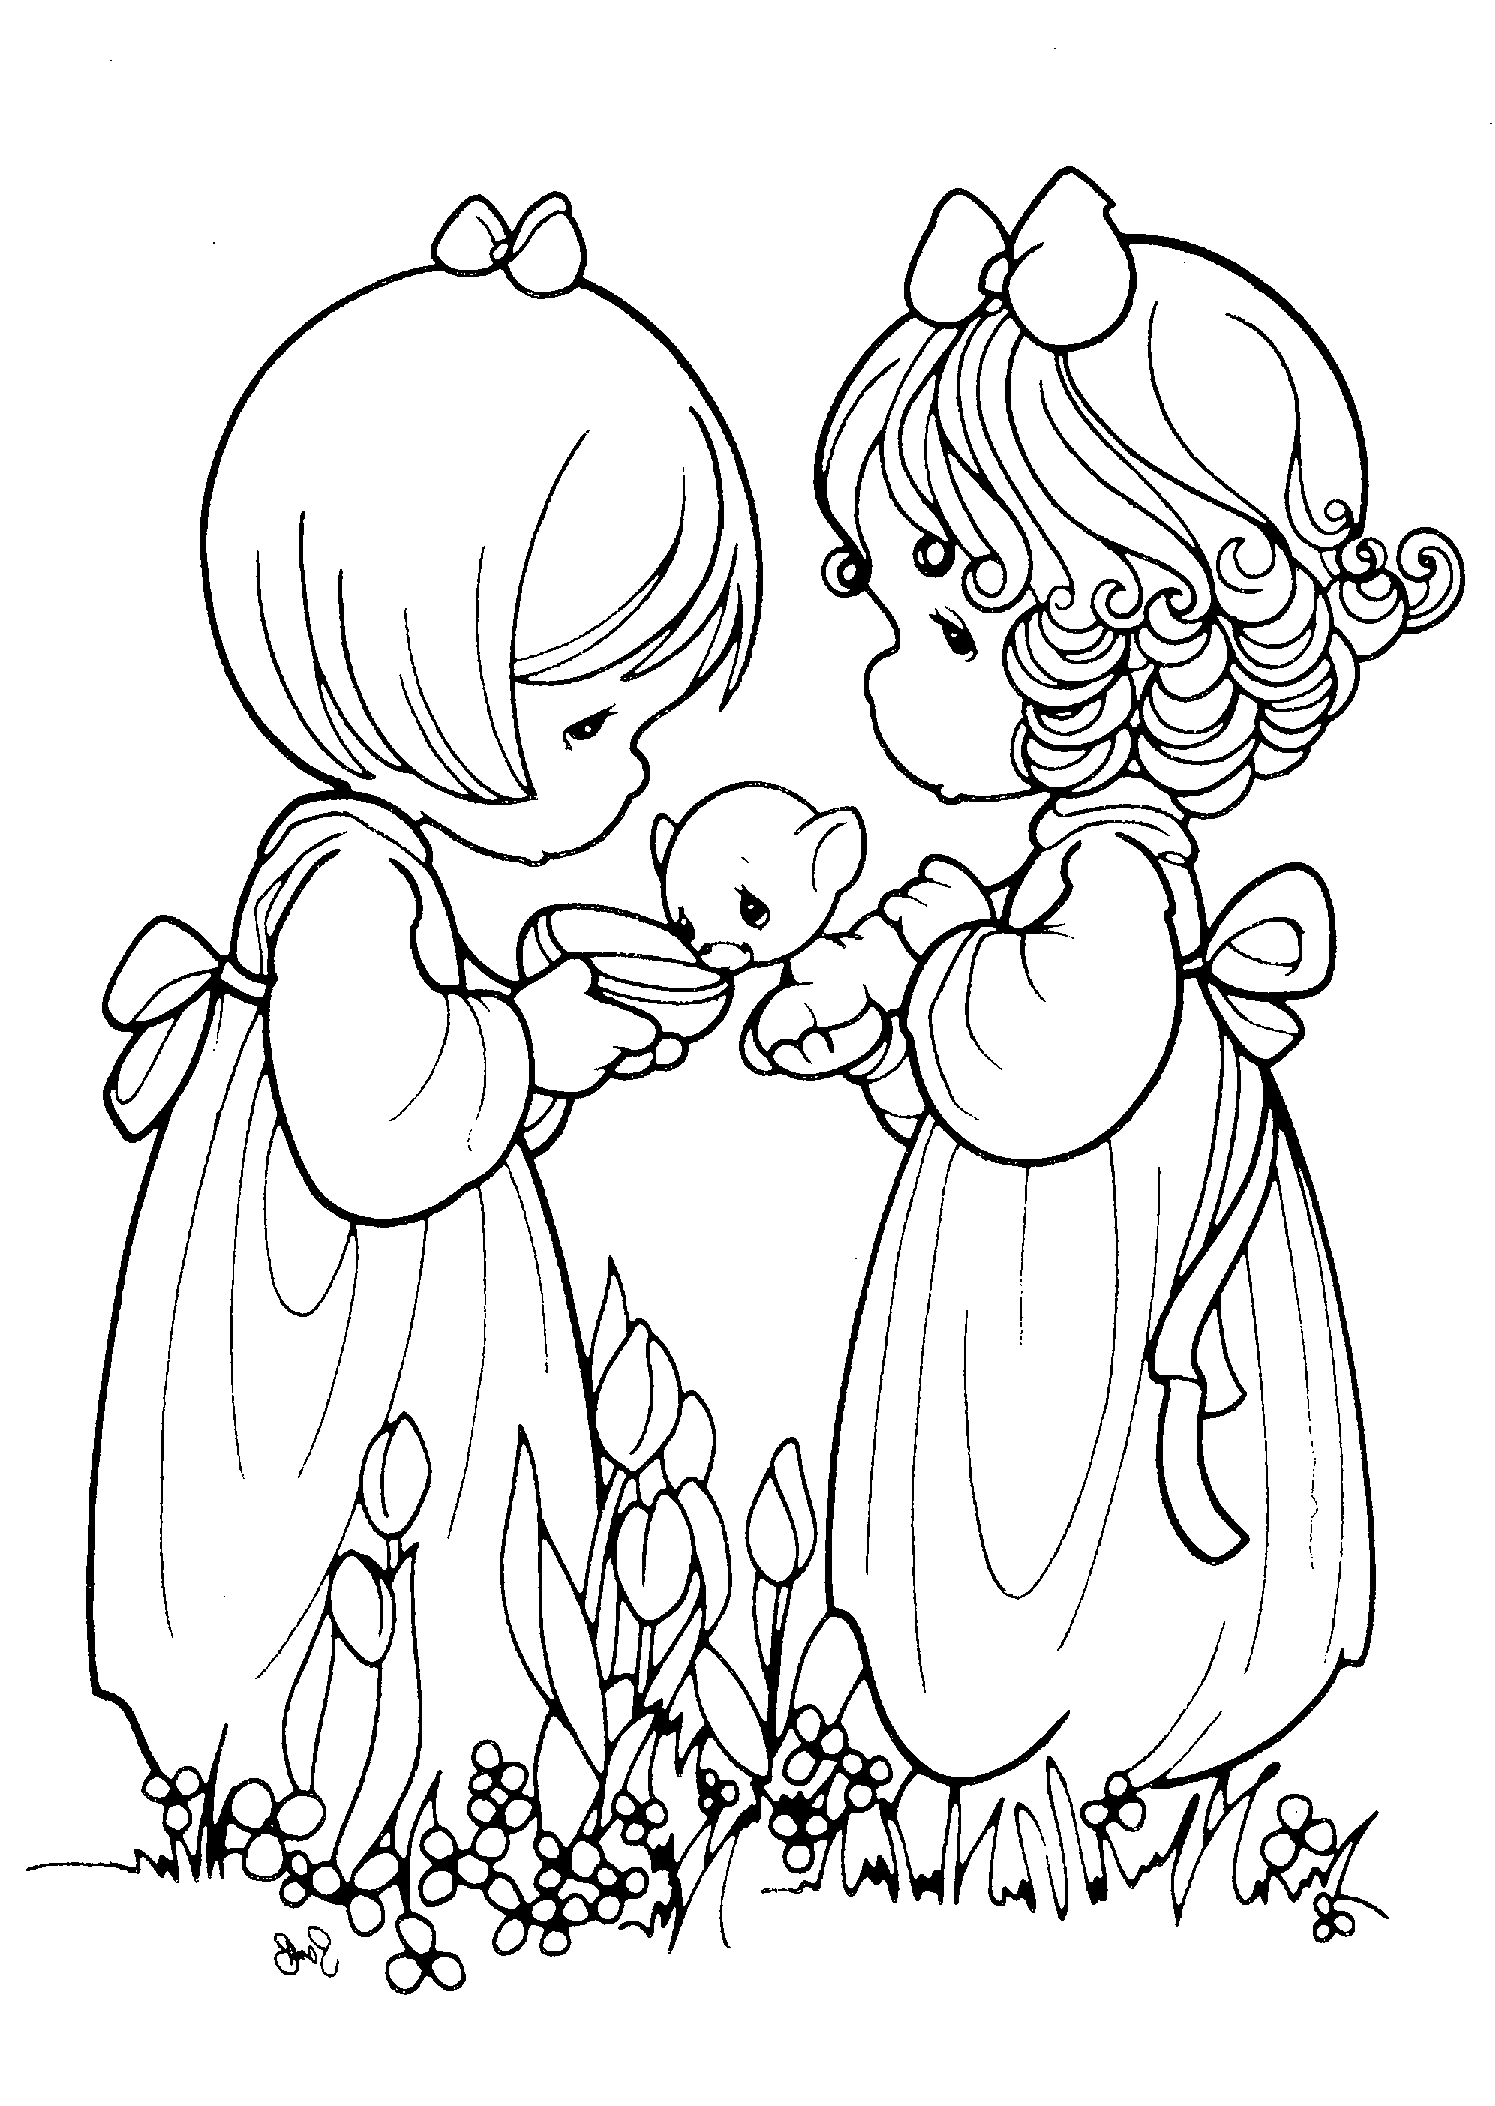 free printable precious moments coloring pages Image Source